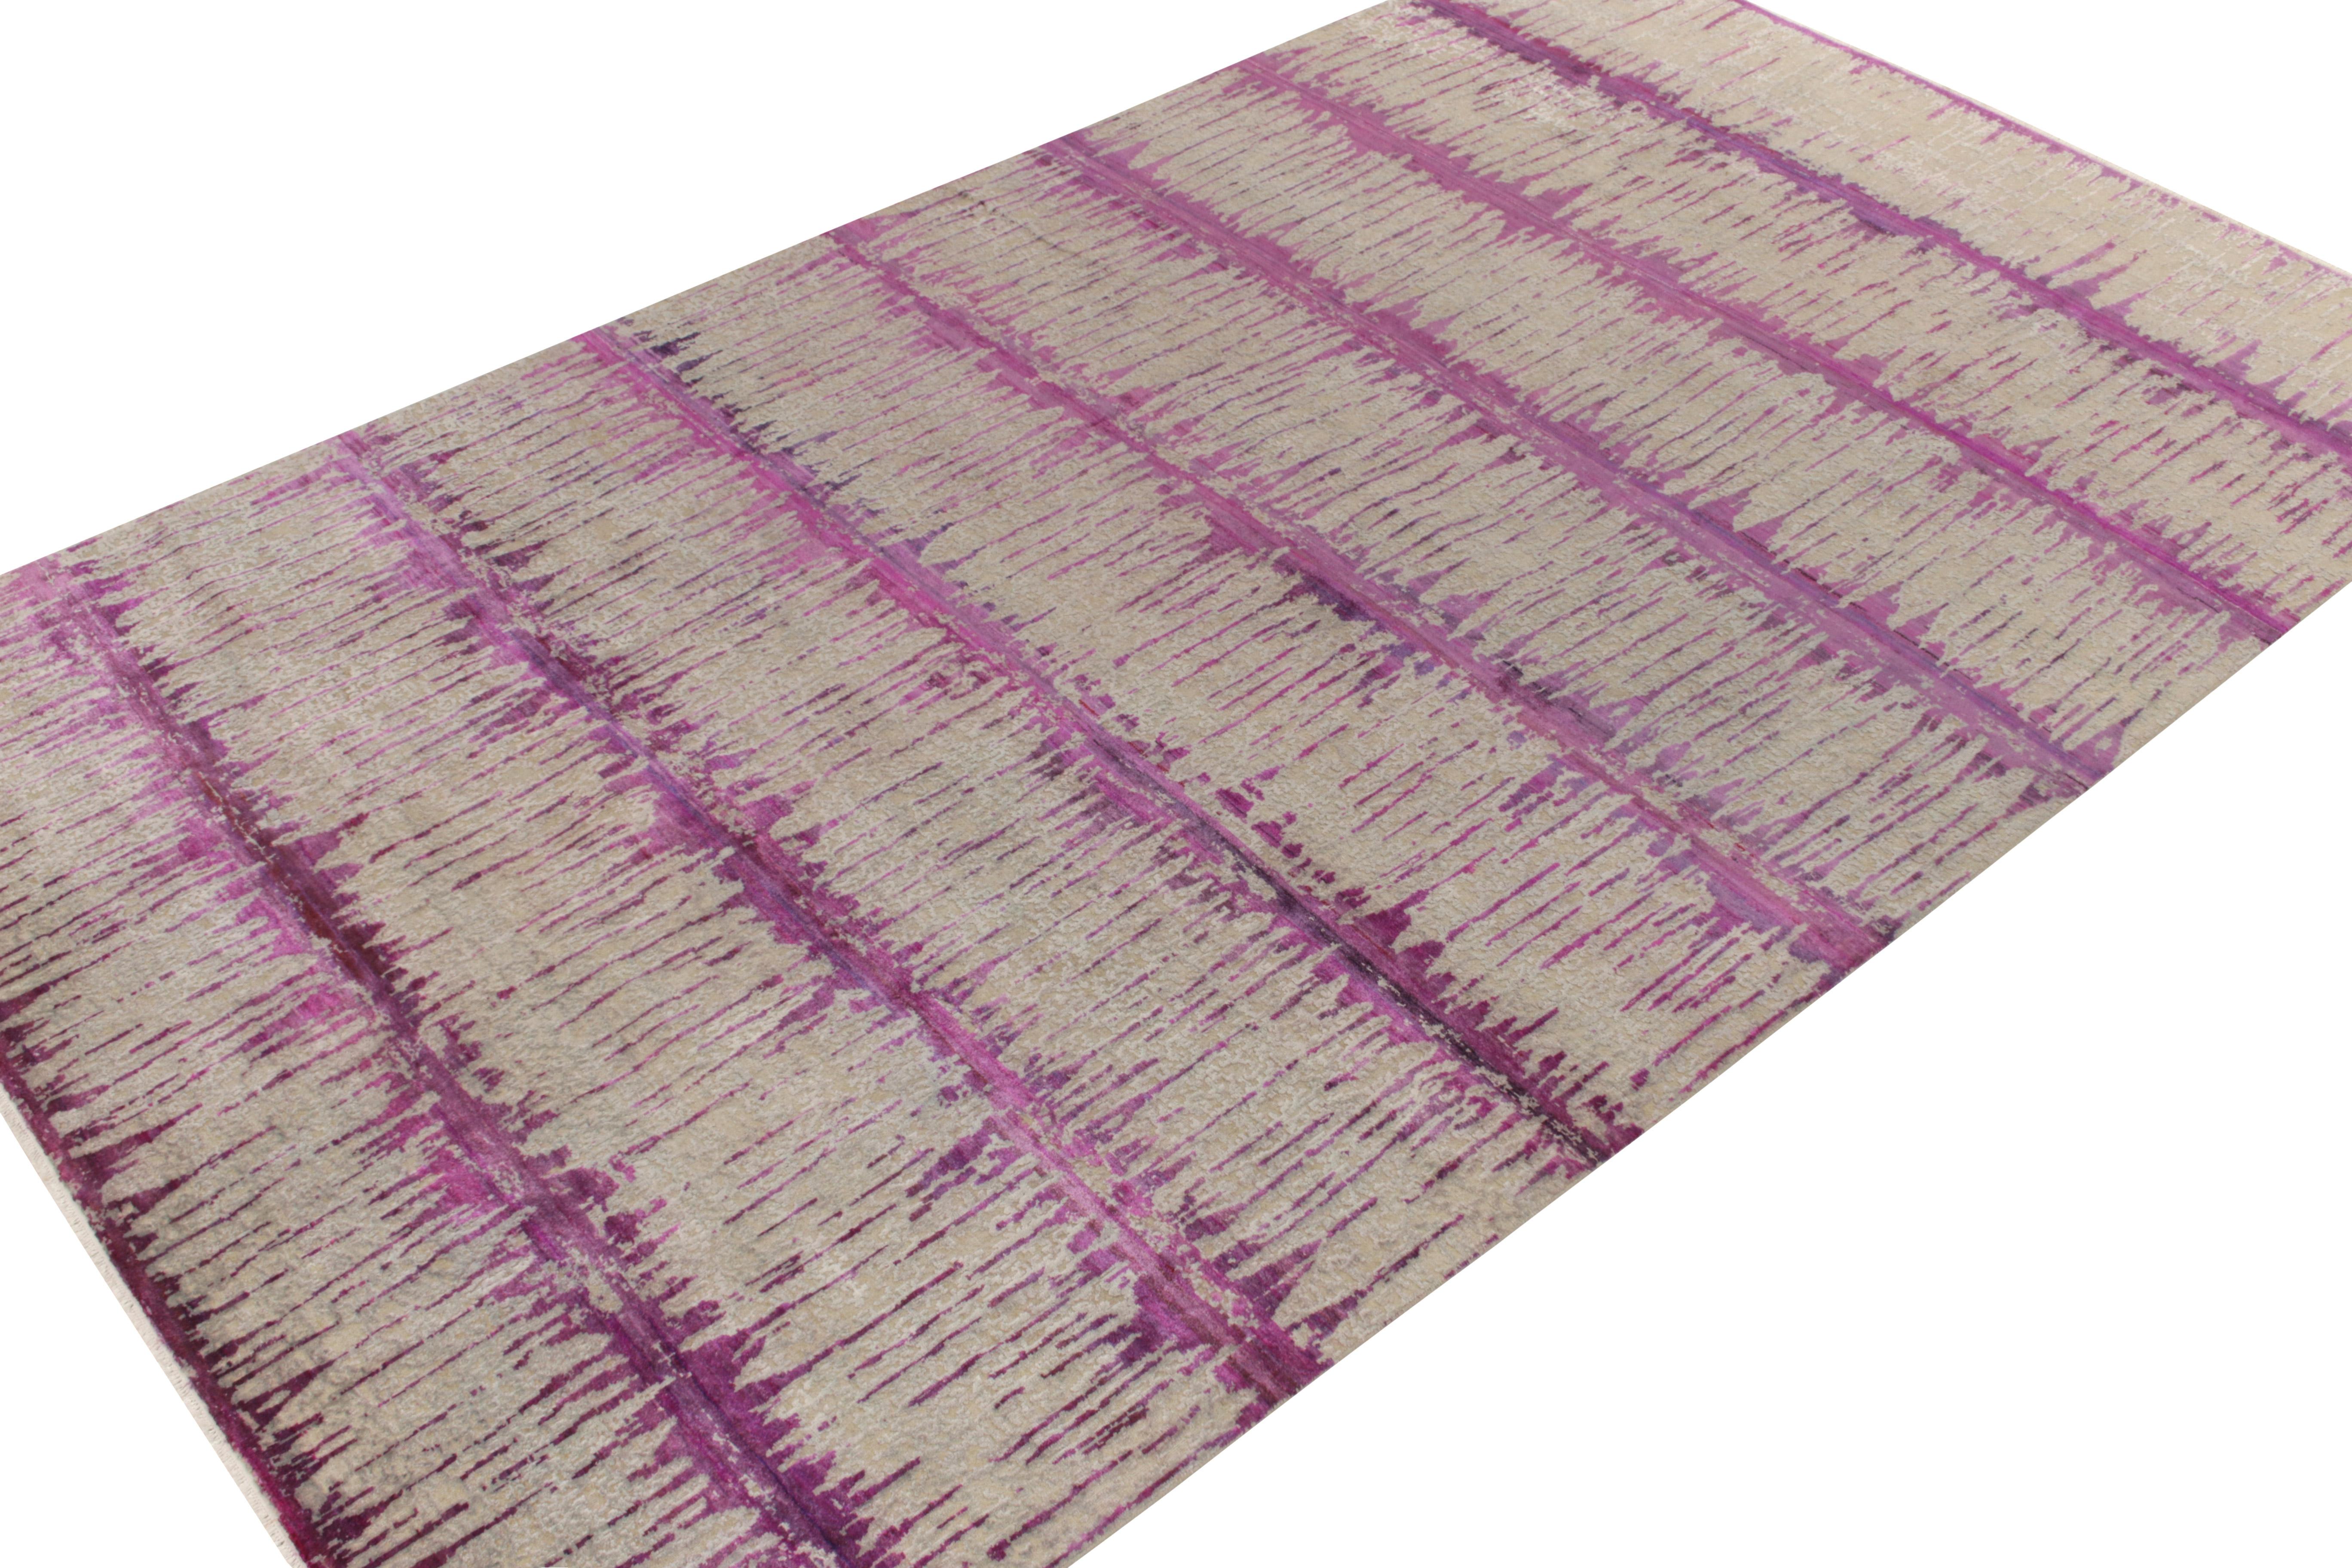 An 8 x 14 hand-knotted custom rug design, available from Rug & Kilim’s abstract designs in their New & Modern collection, making a distinct take in contemporary style with an intriguing pink & purple colorway confidently carrying the elegance of